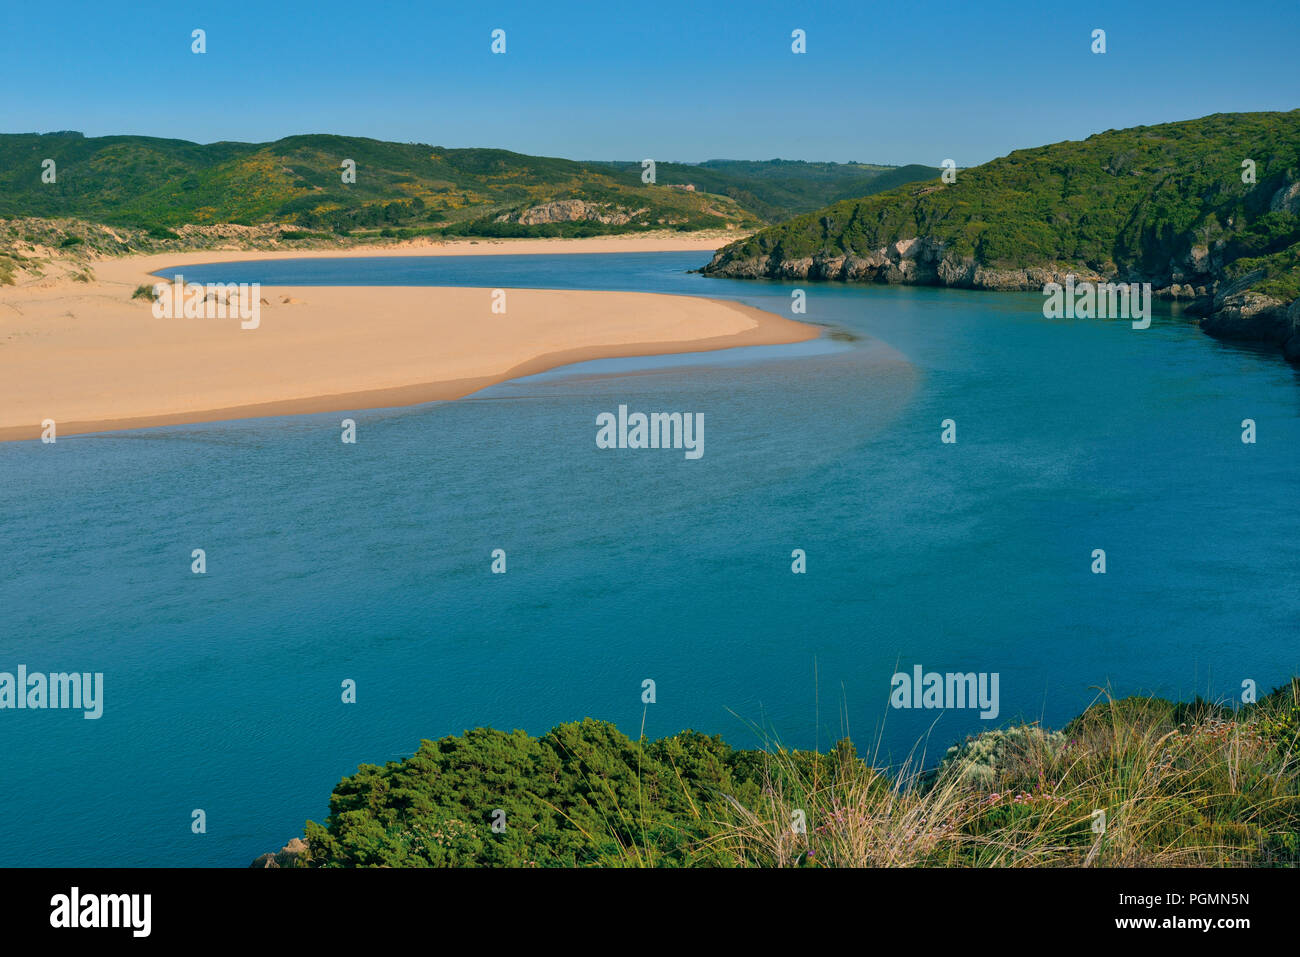 Beautiful river with turquoise water surrounded by sand banks and green hills Stock Photo